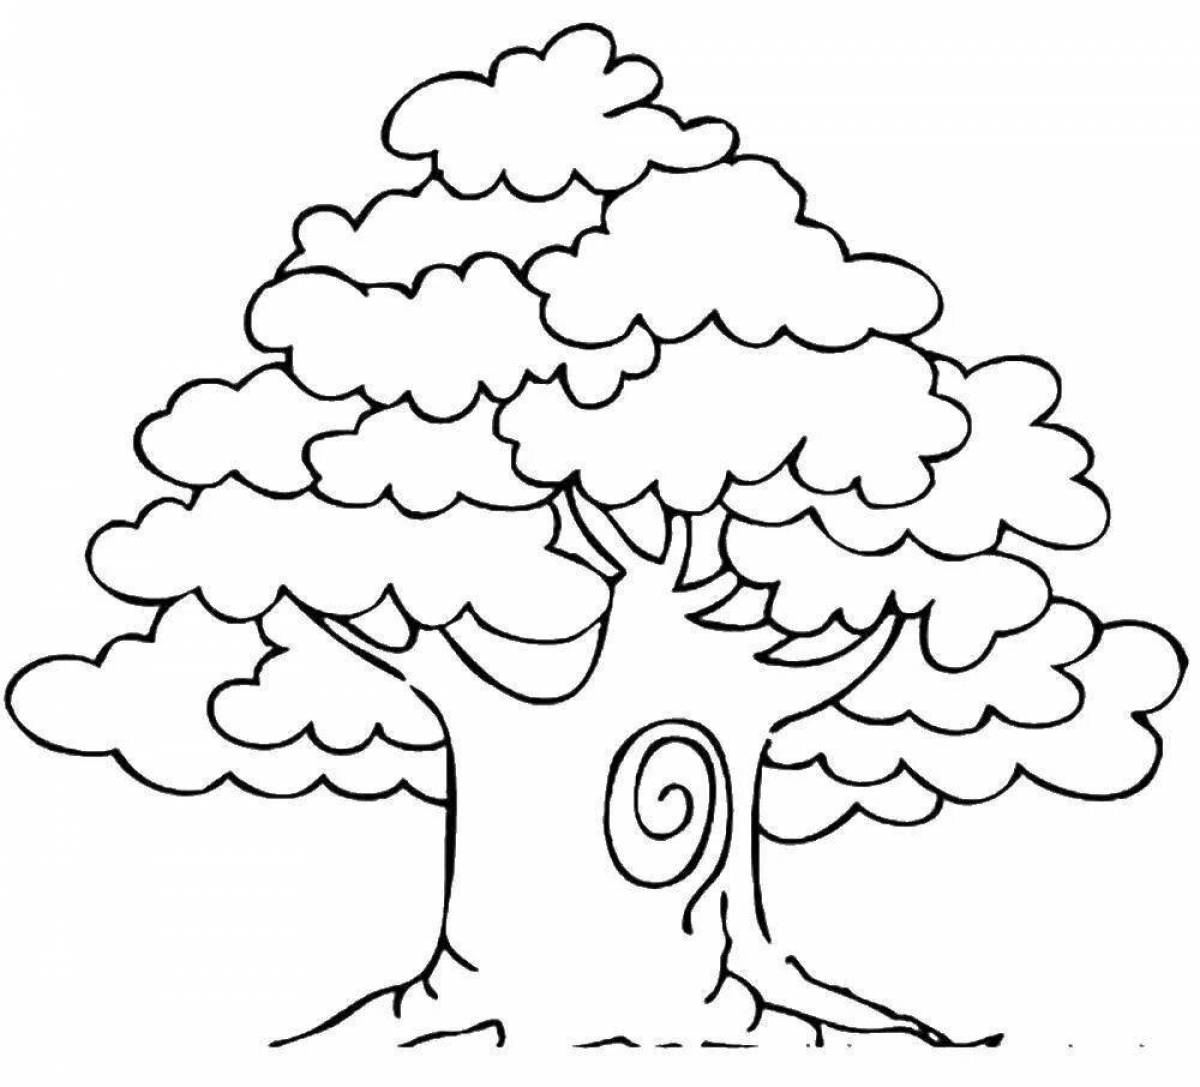 Colorful tree drawing for kids